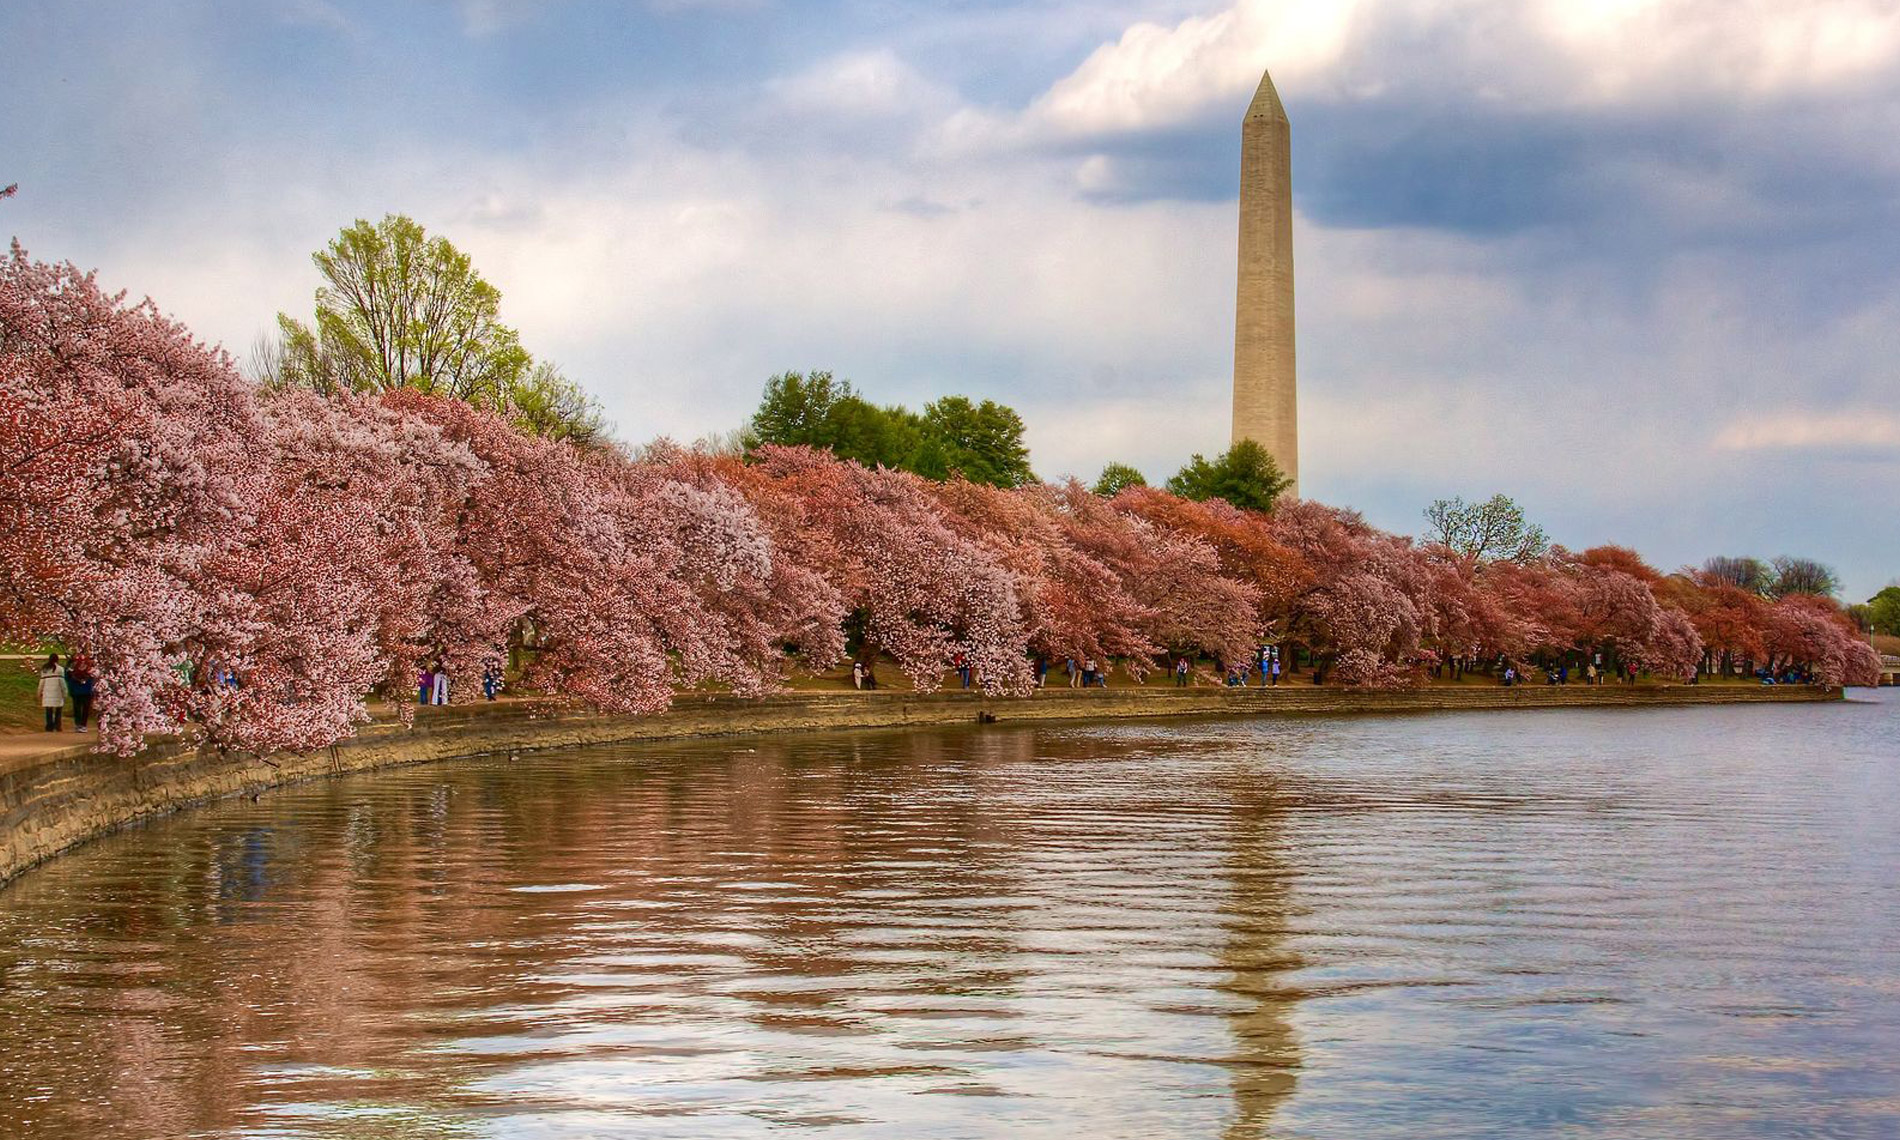 Cherry blossoms and The Washington Monument in Washington D.C.